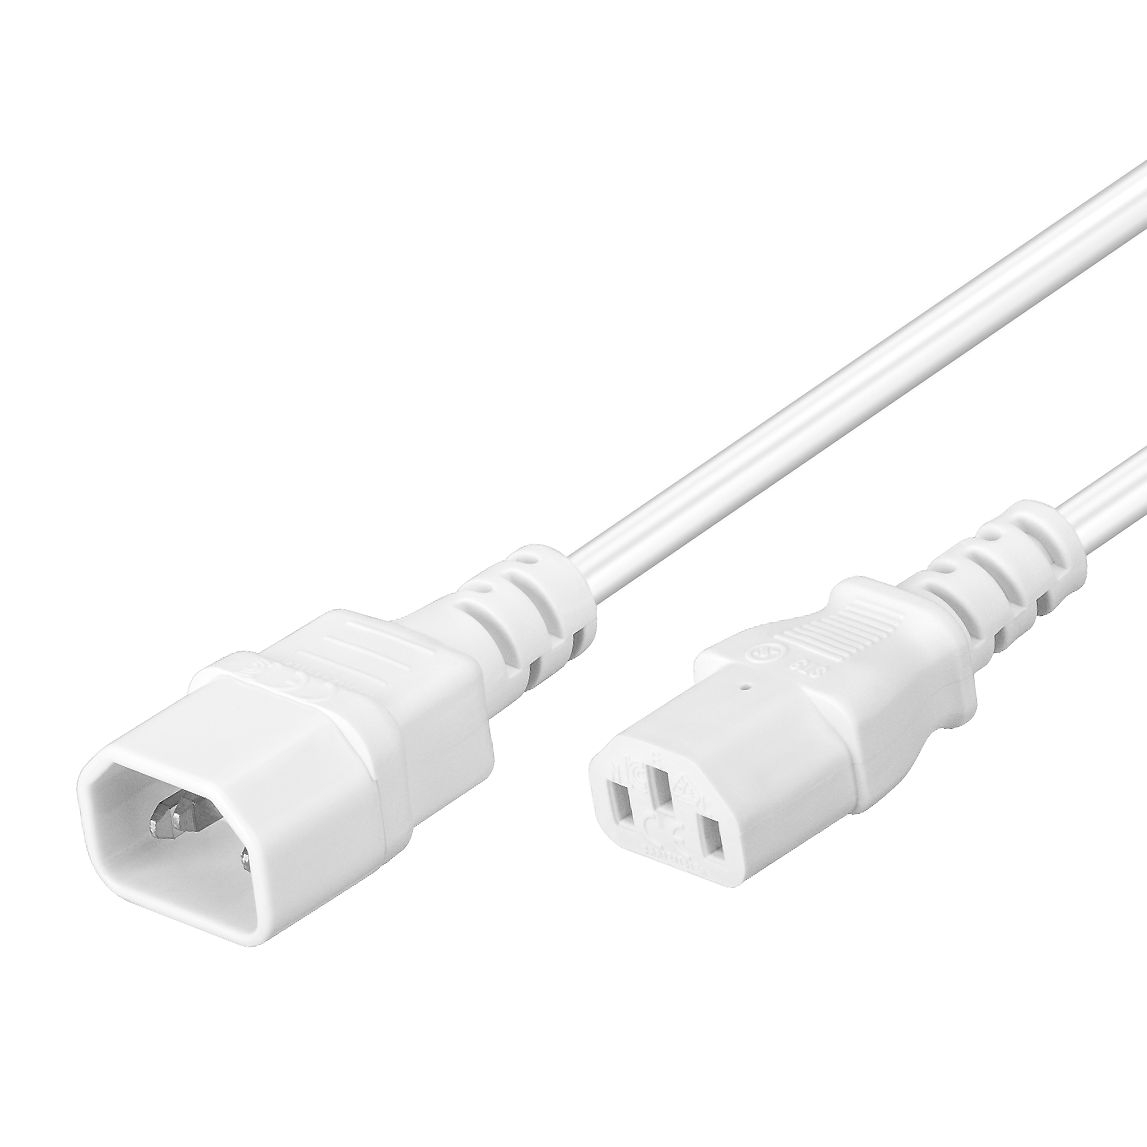 Power cord extension cable C13 to C14 white 3m